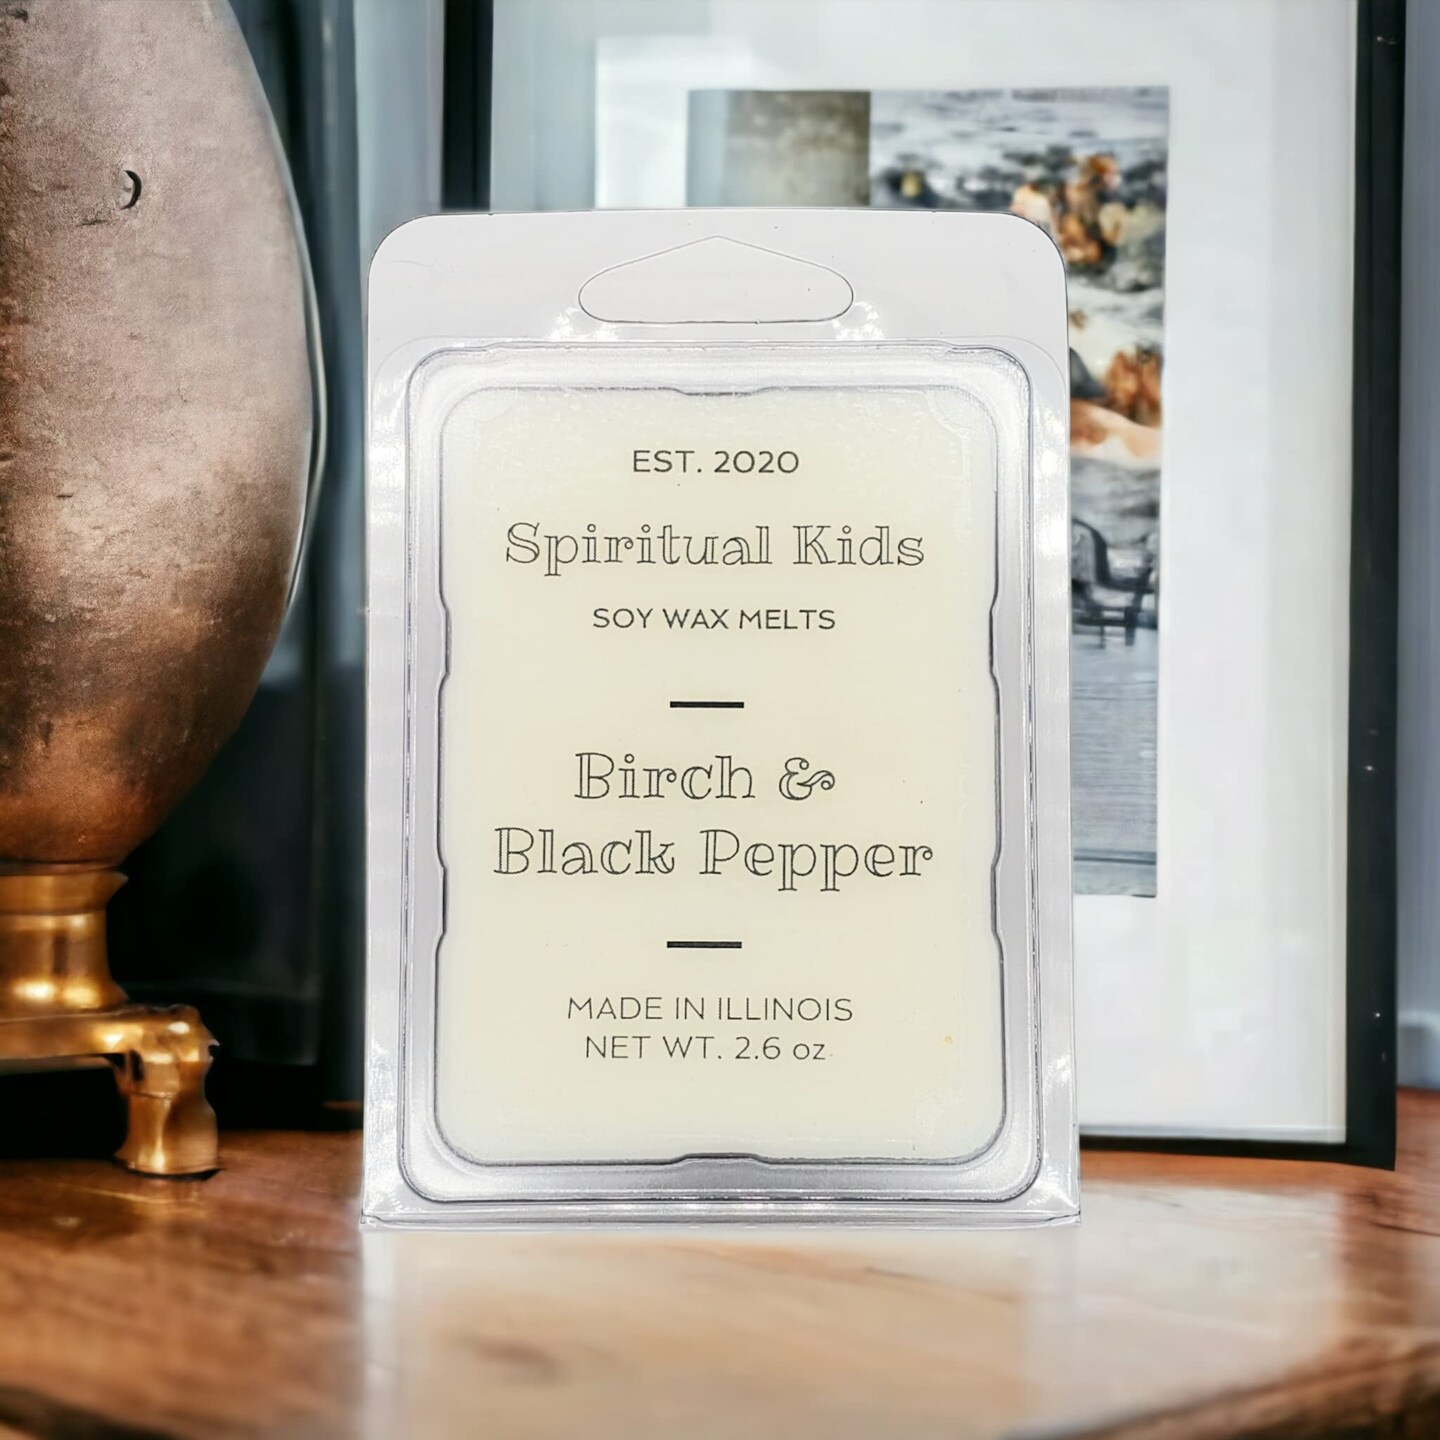 Birch &#x26; Black Pepper Soy Wax Melts 2.6oz 6 Cubes Hand Poured with Fragrant/Essential Oils HIGHLY SCENTED | Herbal &#x26; Spicy Wax Melts